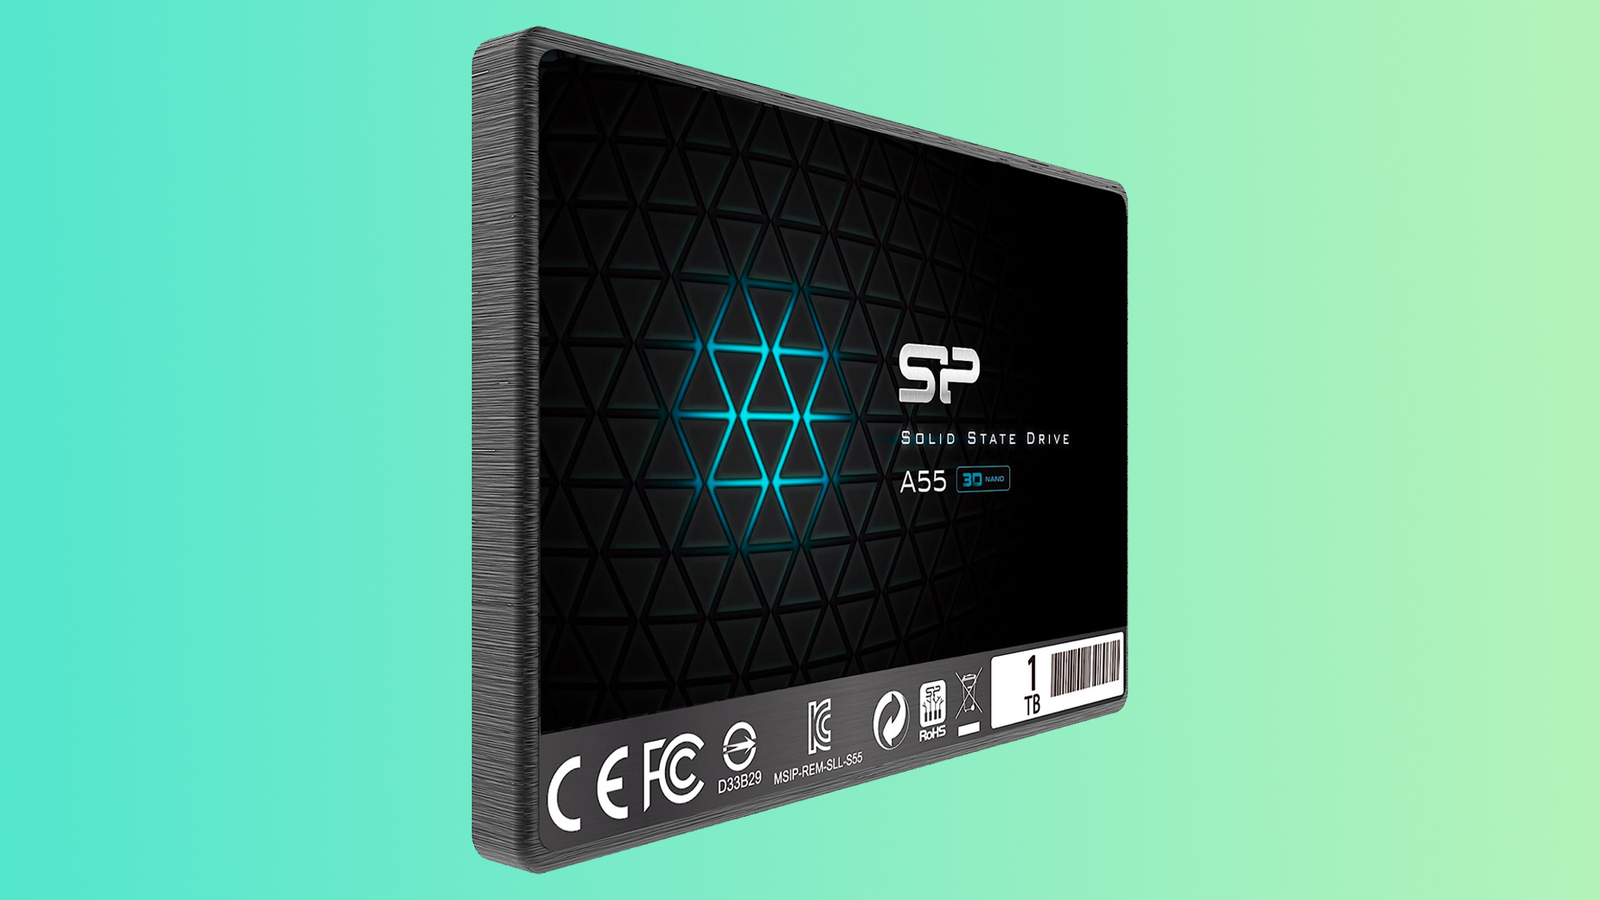 Grab this 1TB Silicon Power SATA SSD for just £31 from